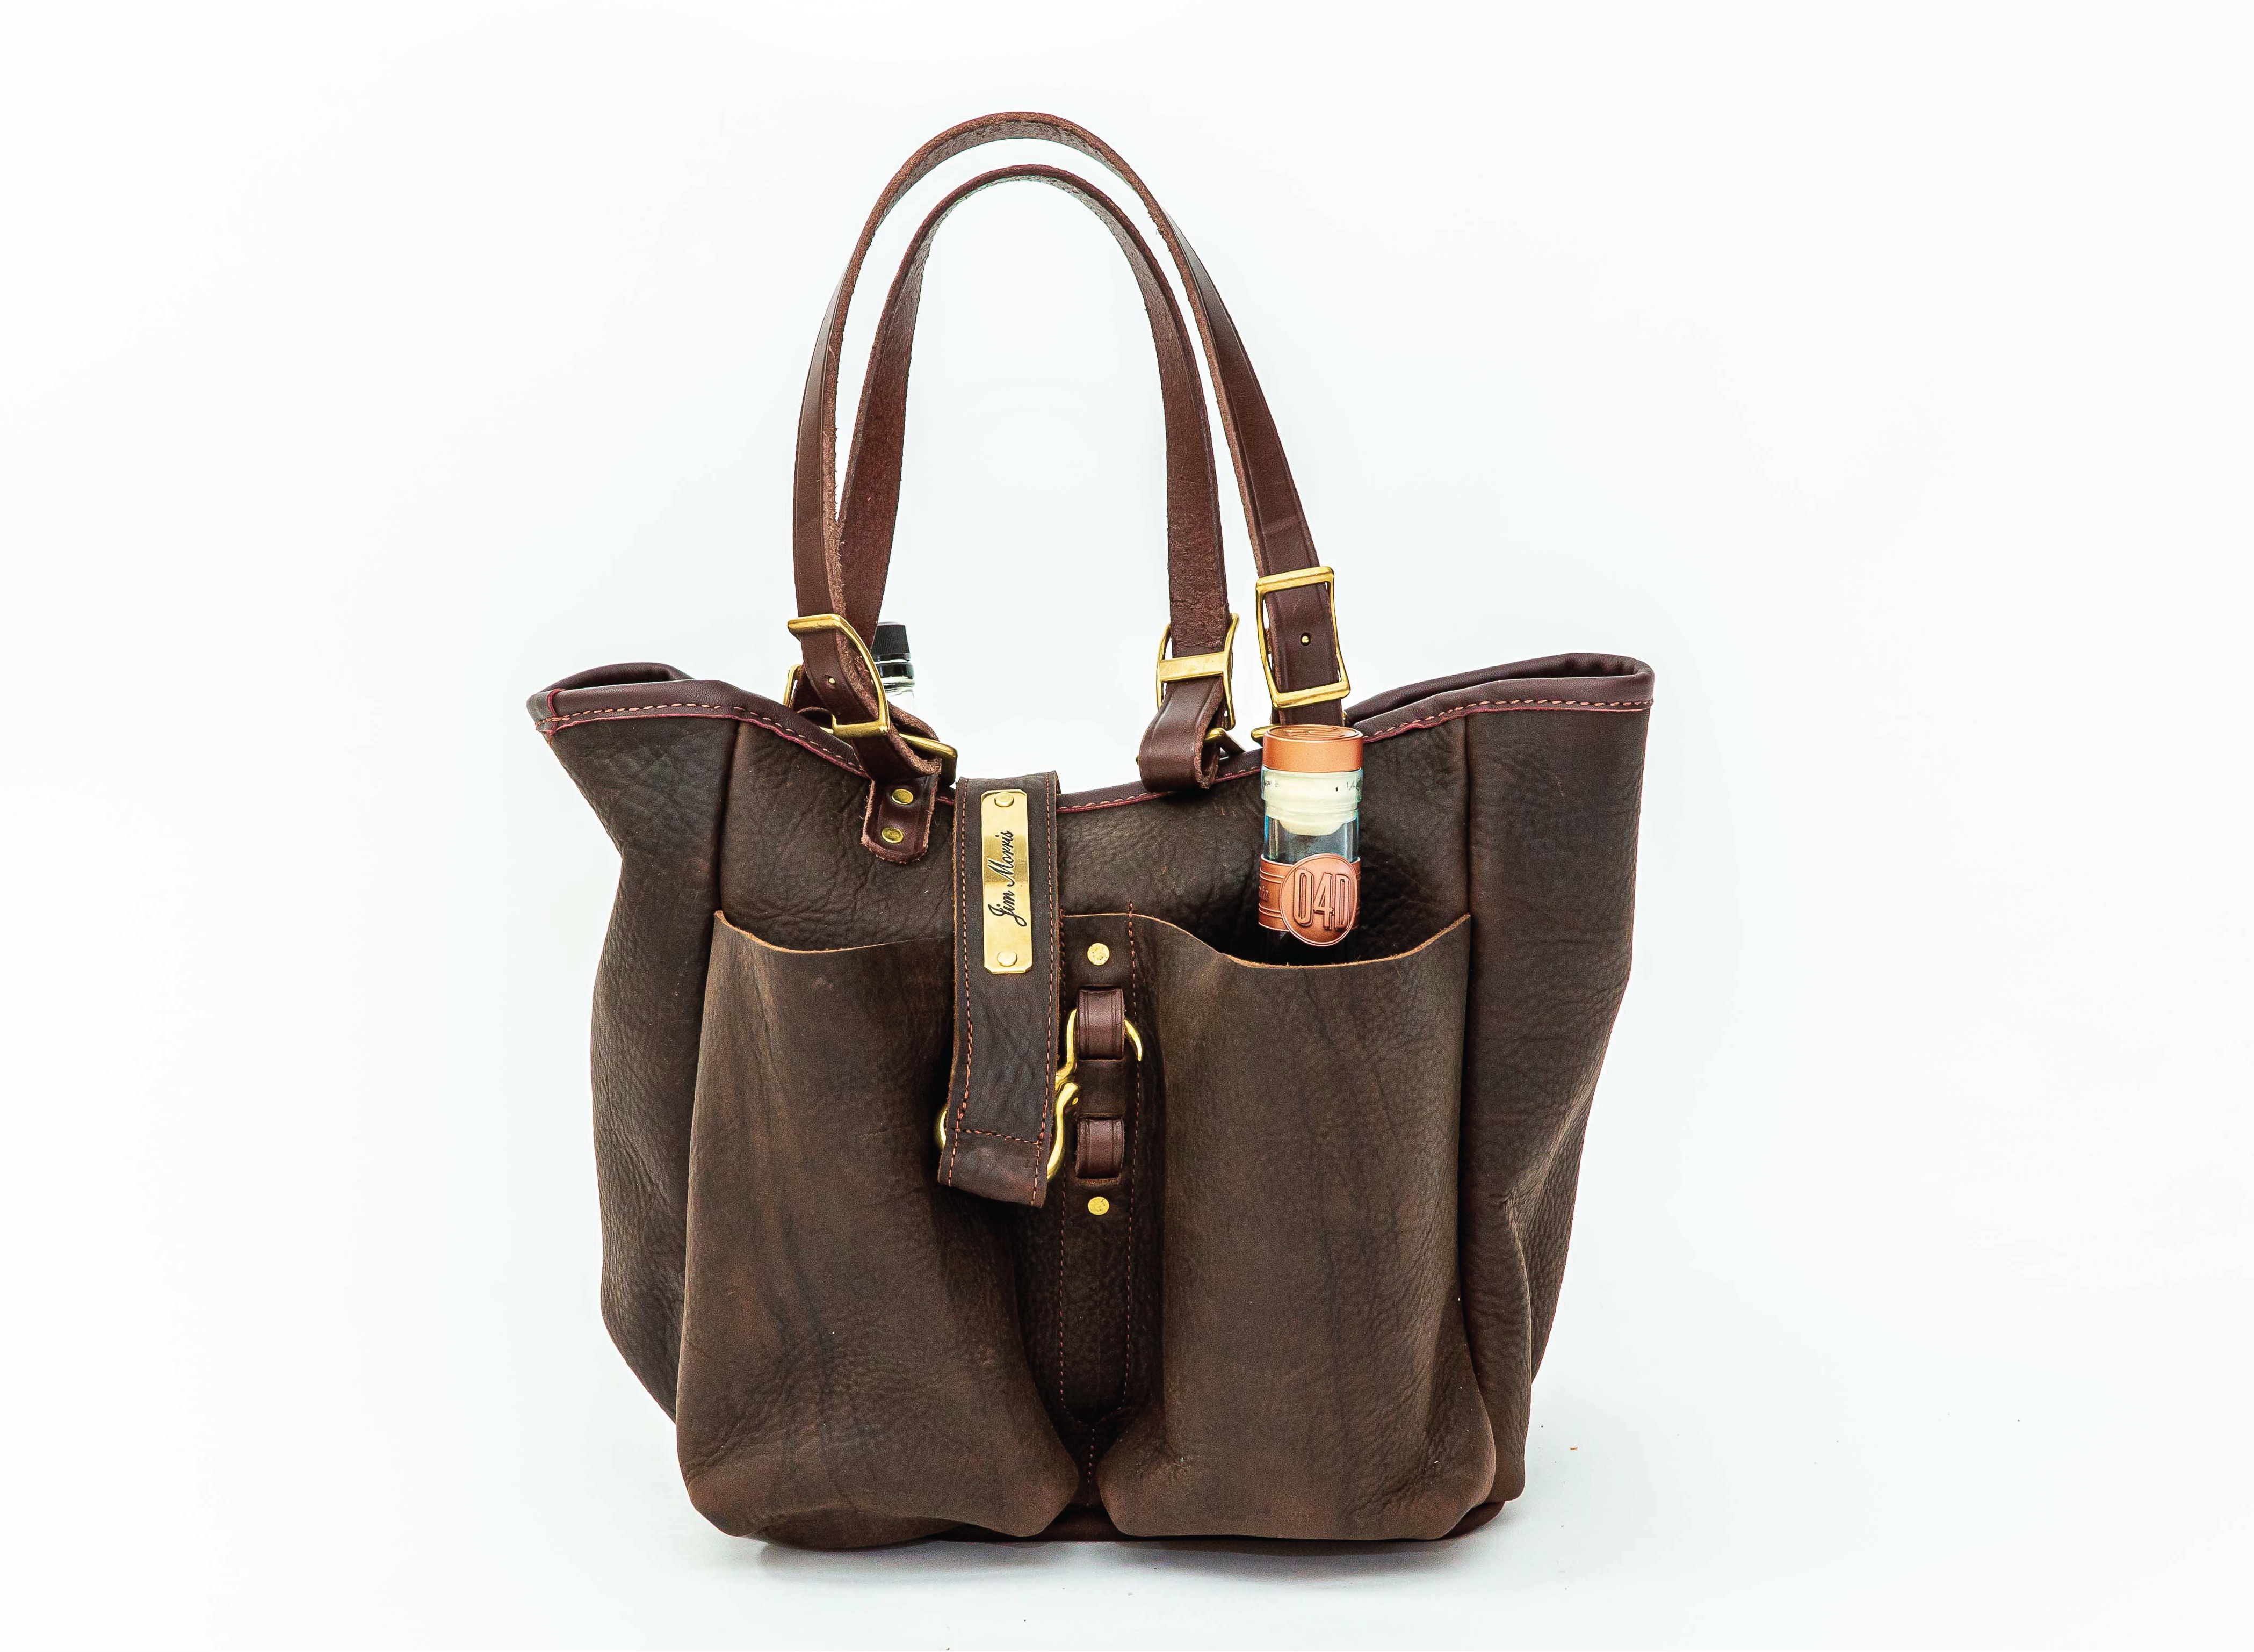 Leather Messenger Bag In Almond – Leather Pasture